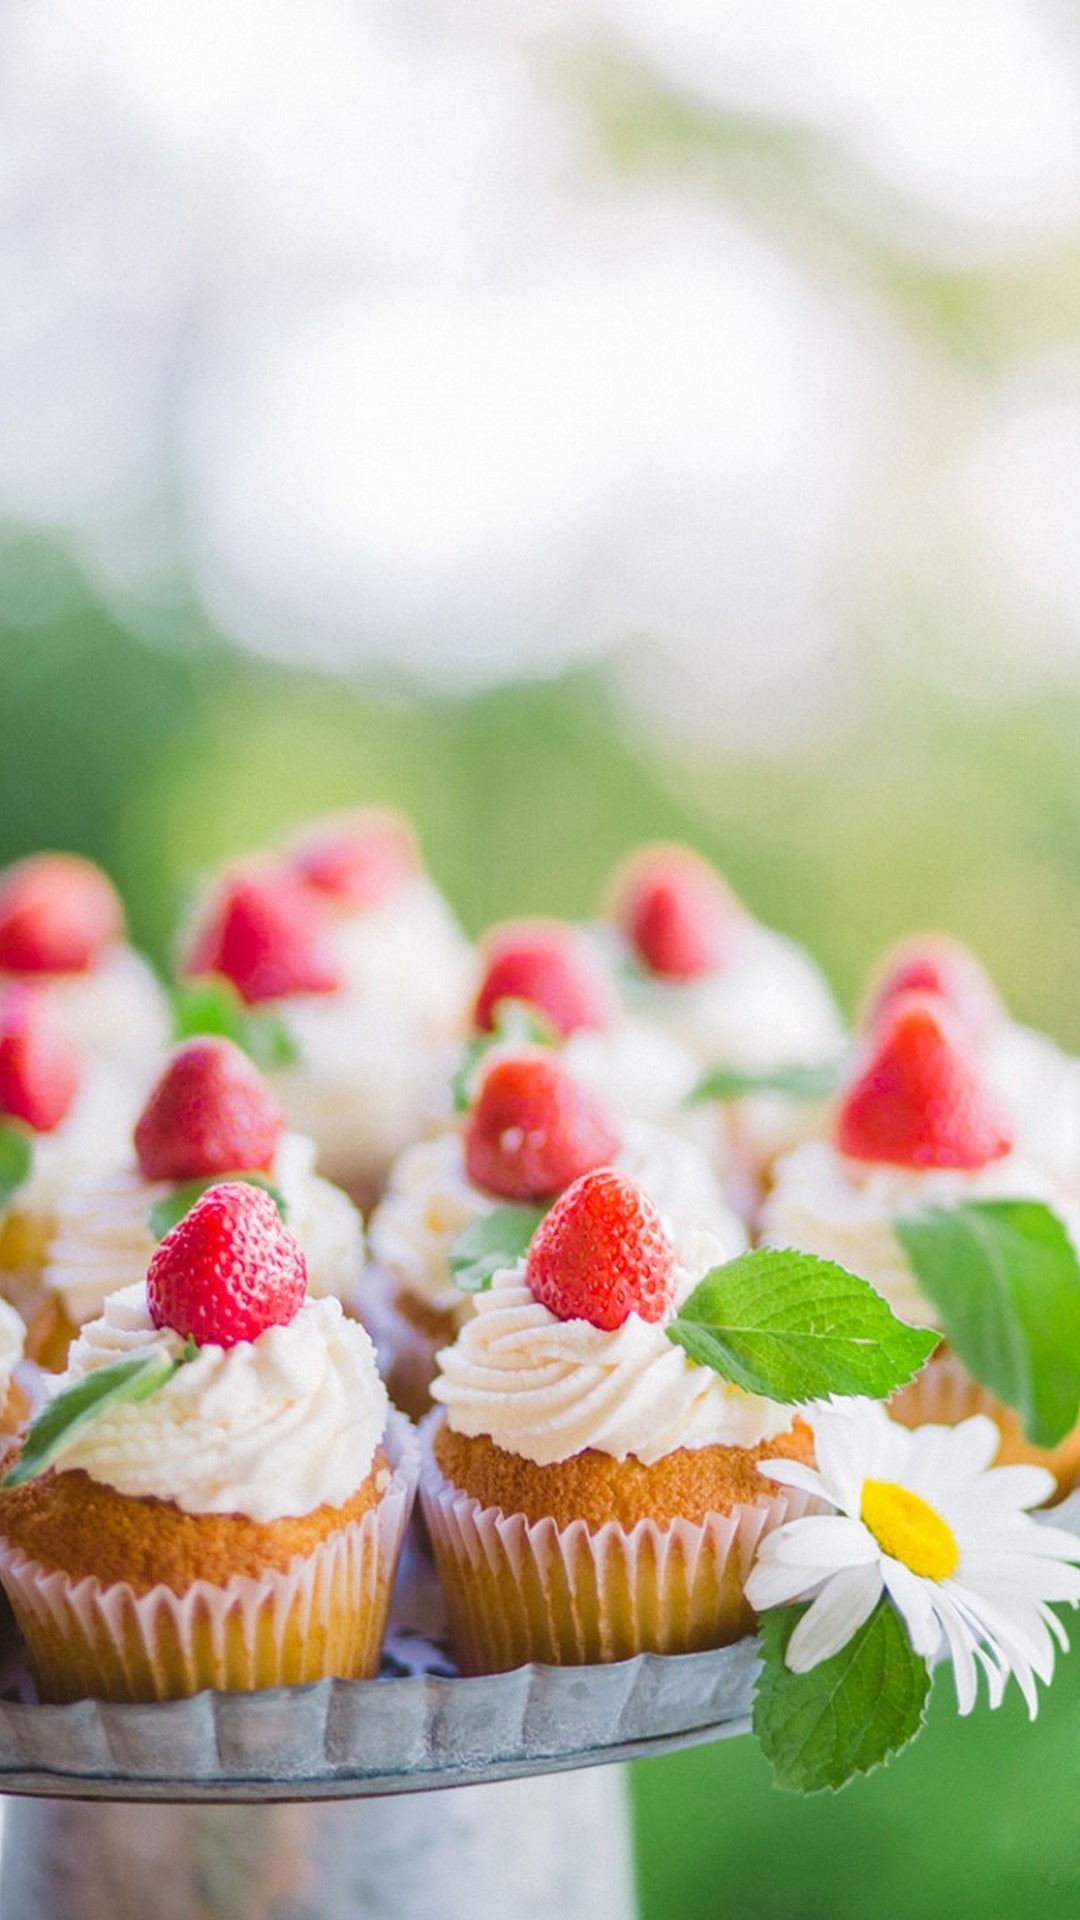 Android Wallpaper Strawberry Cake Free Download